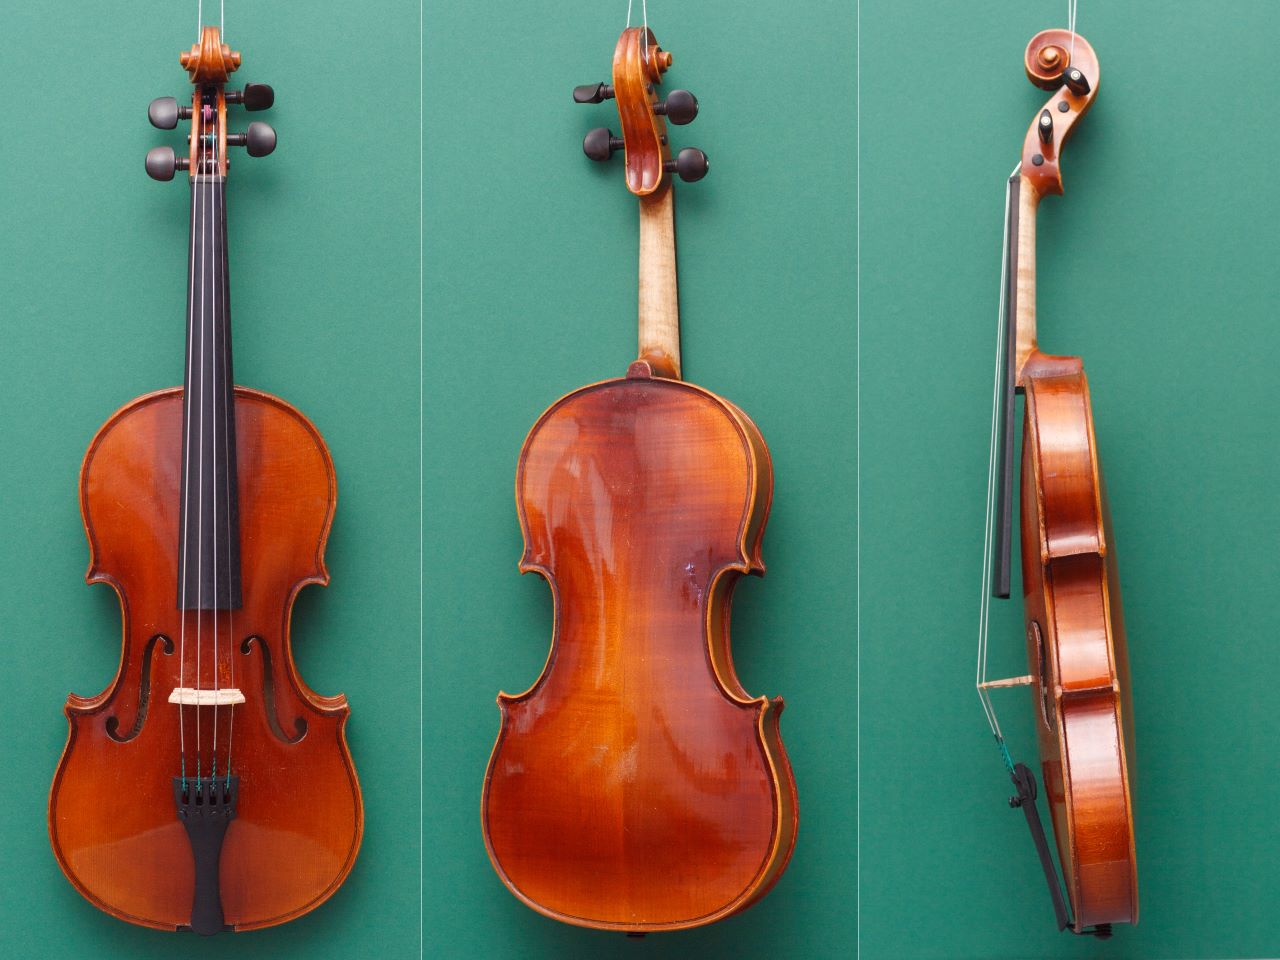 Violin, Viola, Cello, or Bass: Which is the Right String Instrument for Me?